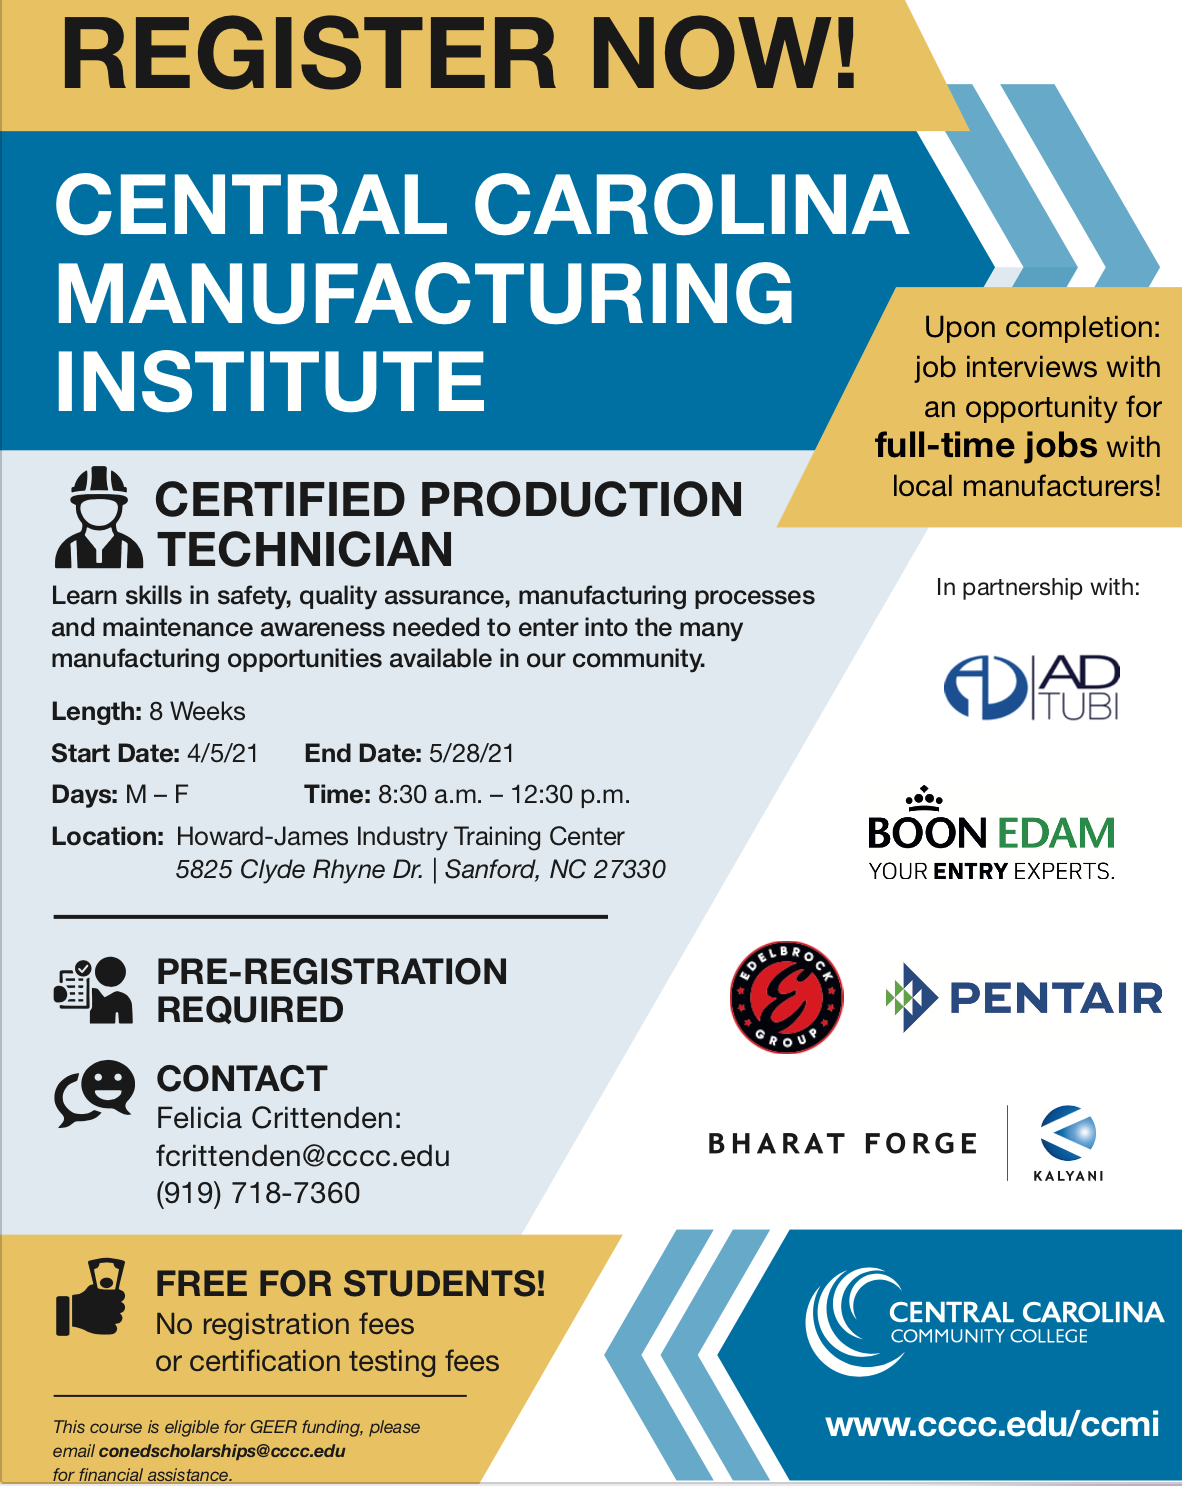 Read the full story, Register now for the Central Carolina Manufacturing Institute